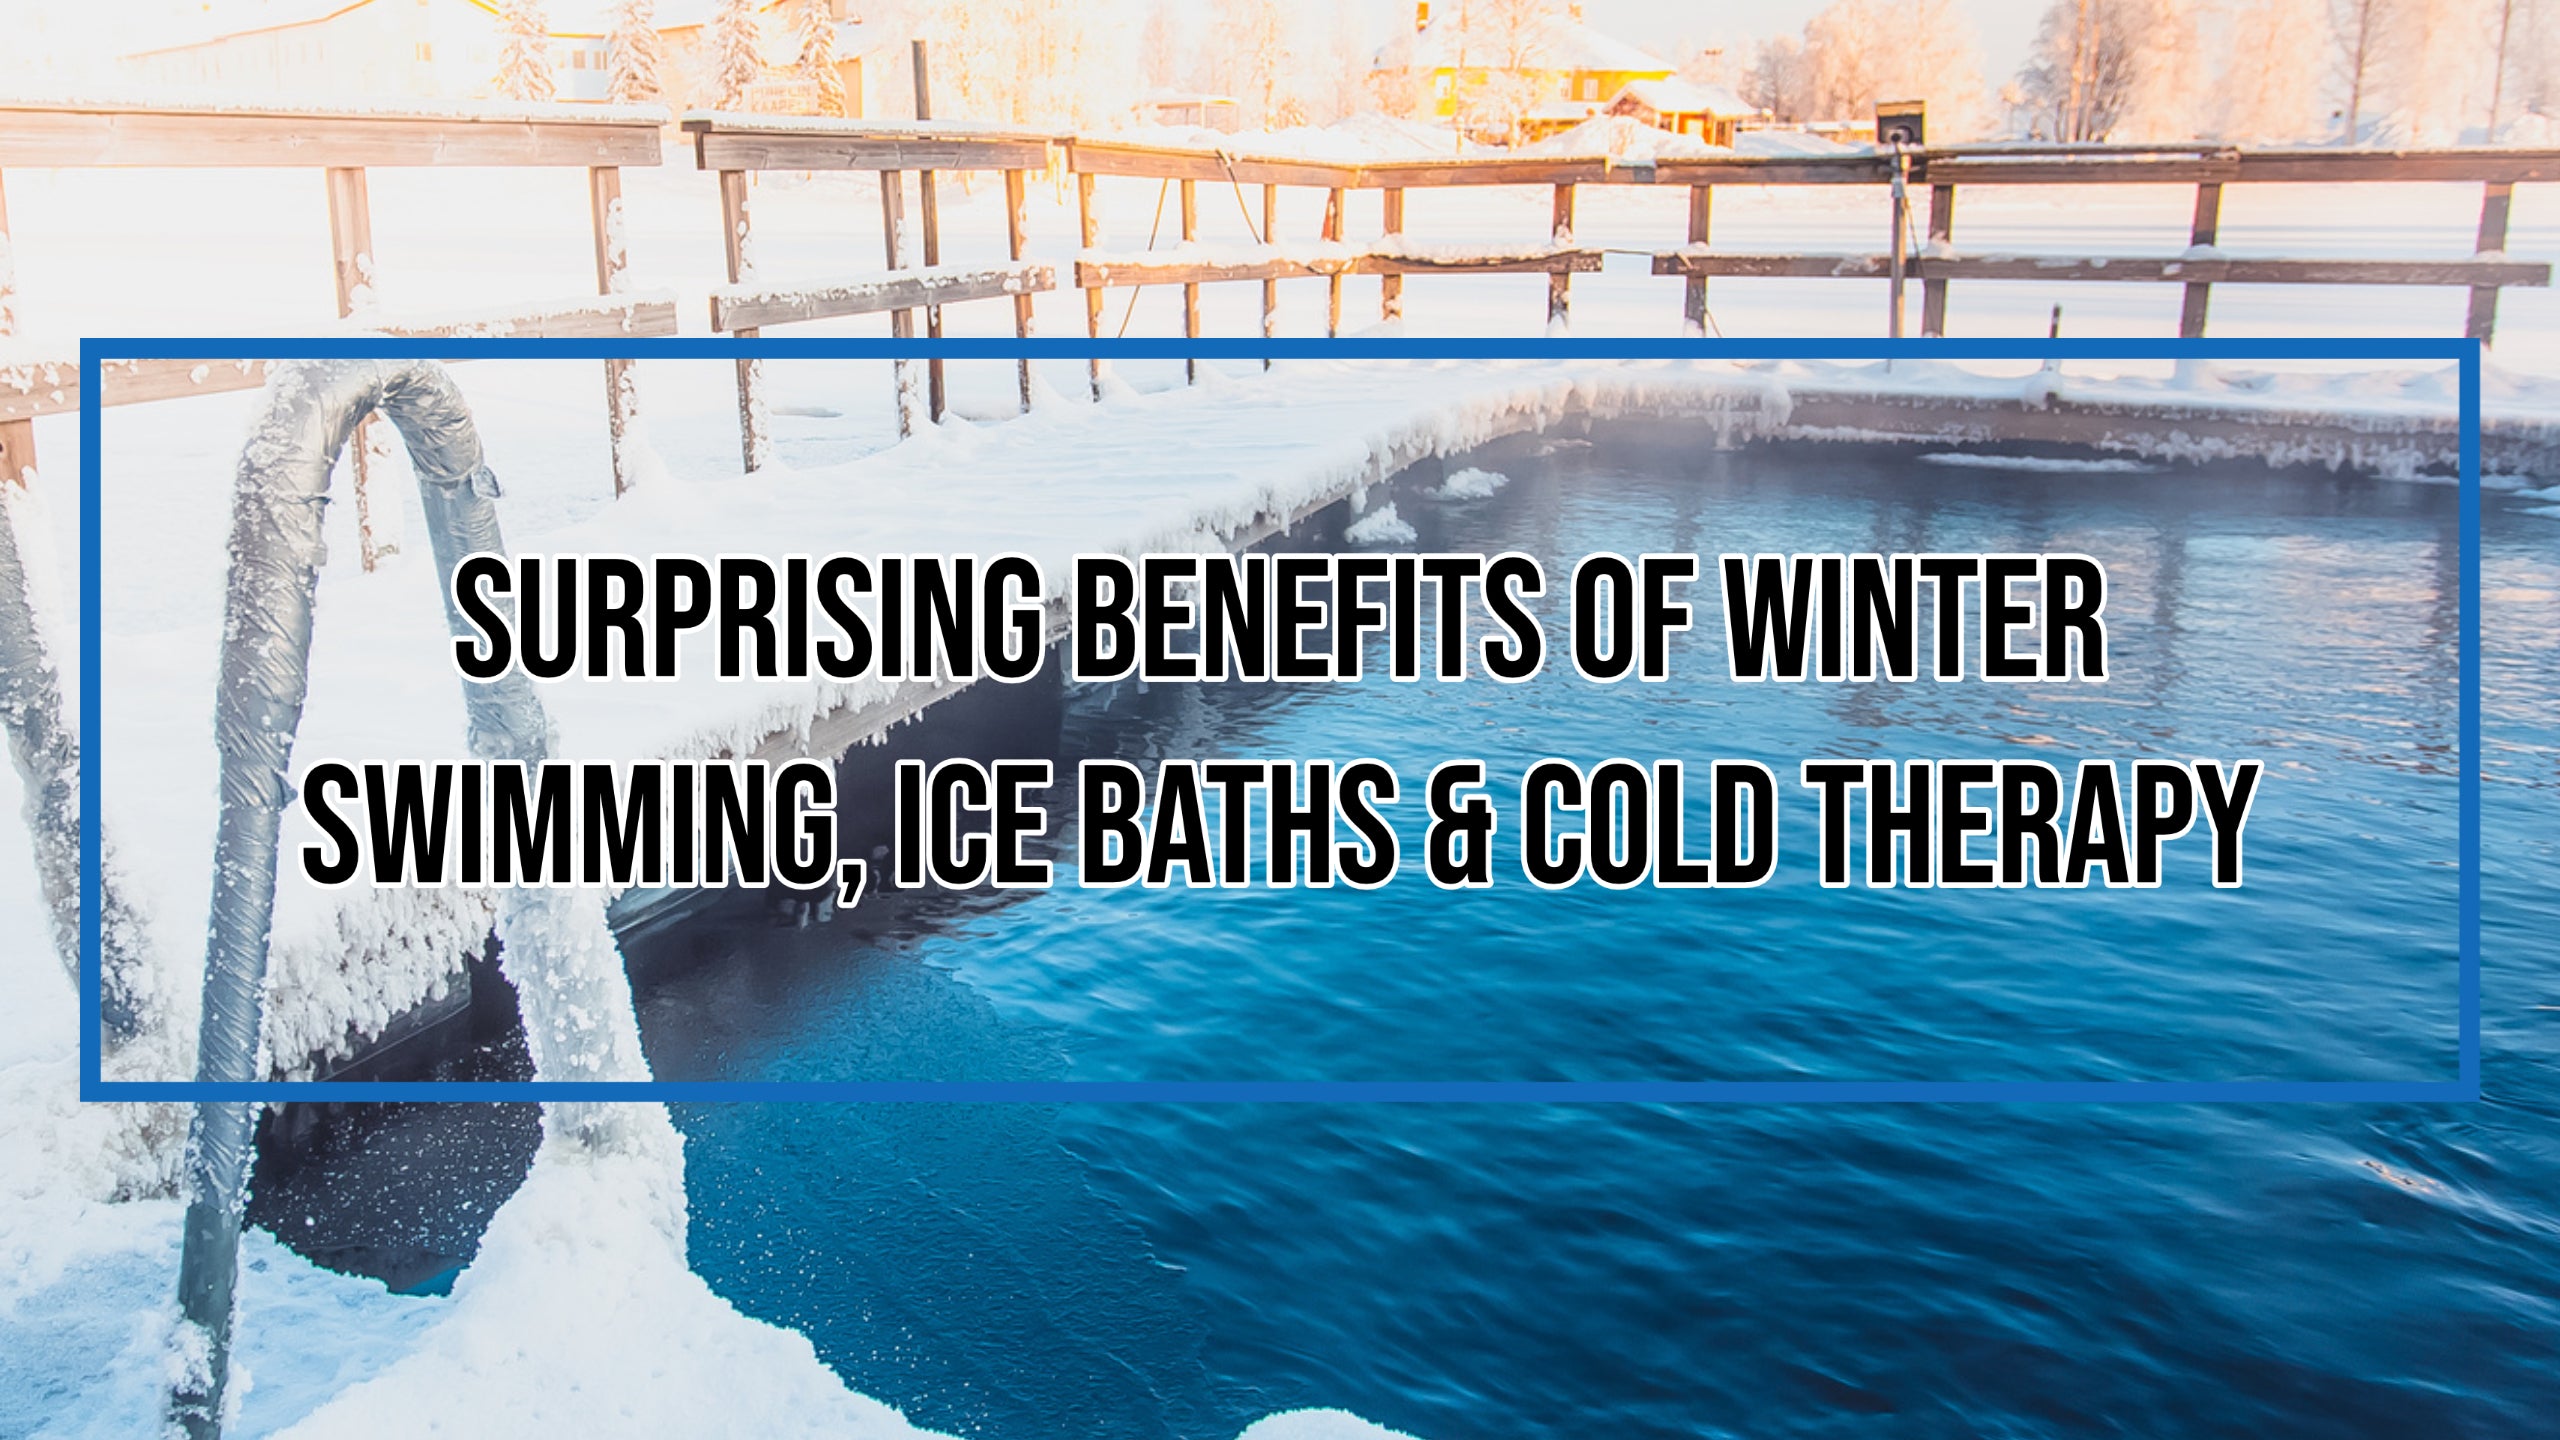 Surprising Benefits of Winter Swimming, Ice Baths & Cold Therapy